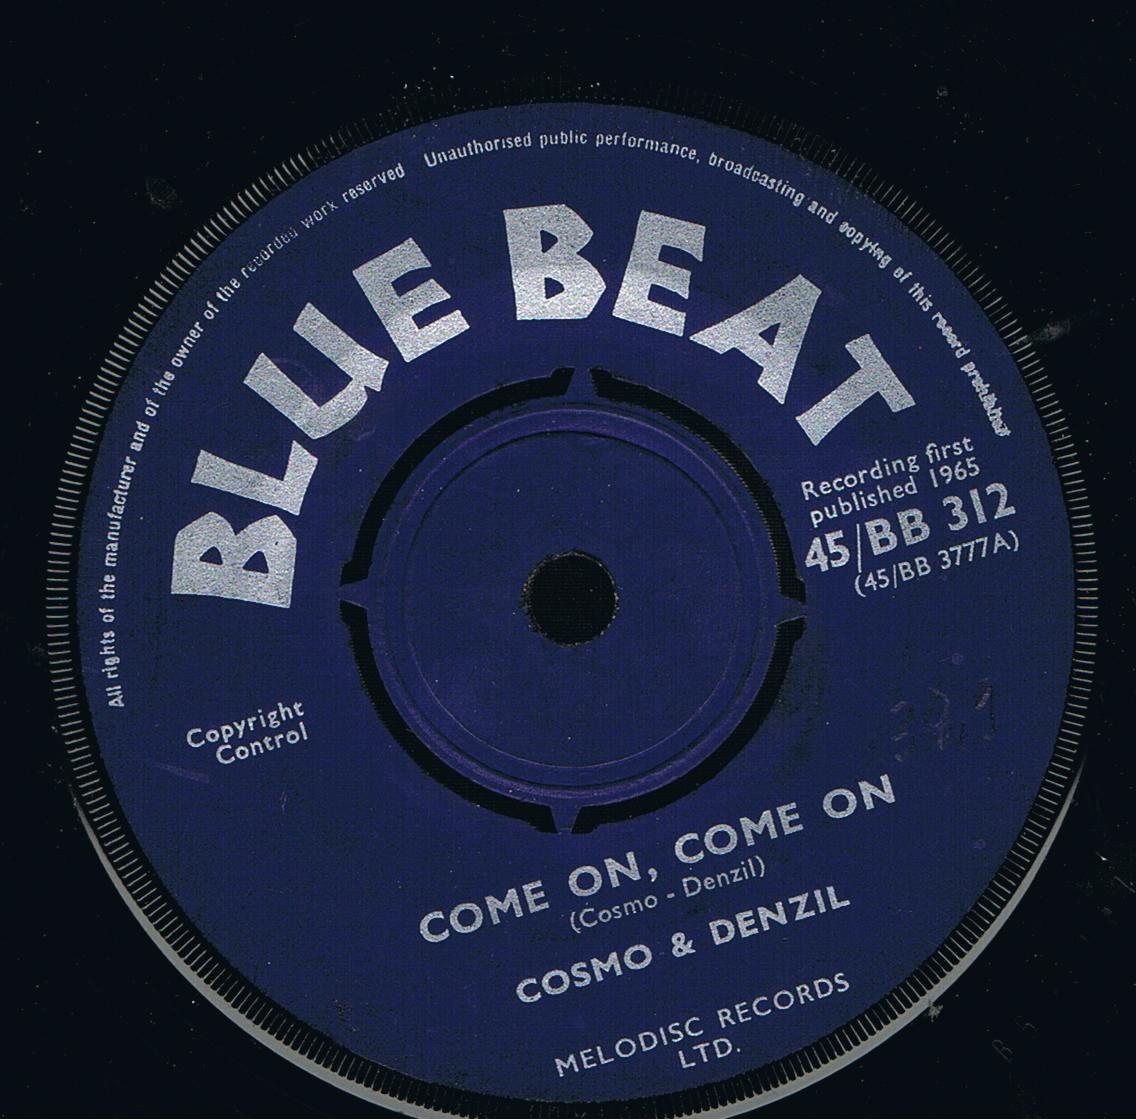 Cosmo & Denzil - Come On Come On / Cosmo & Denzil - I Don't Want You (Original 7")